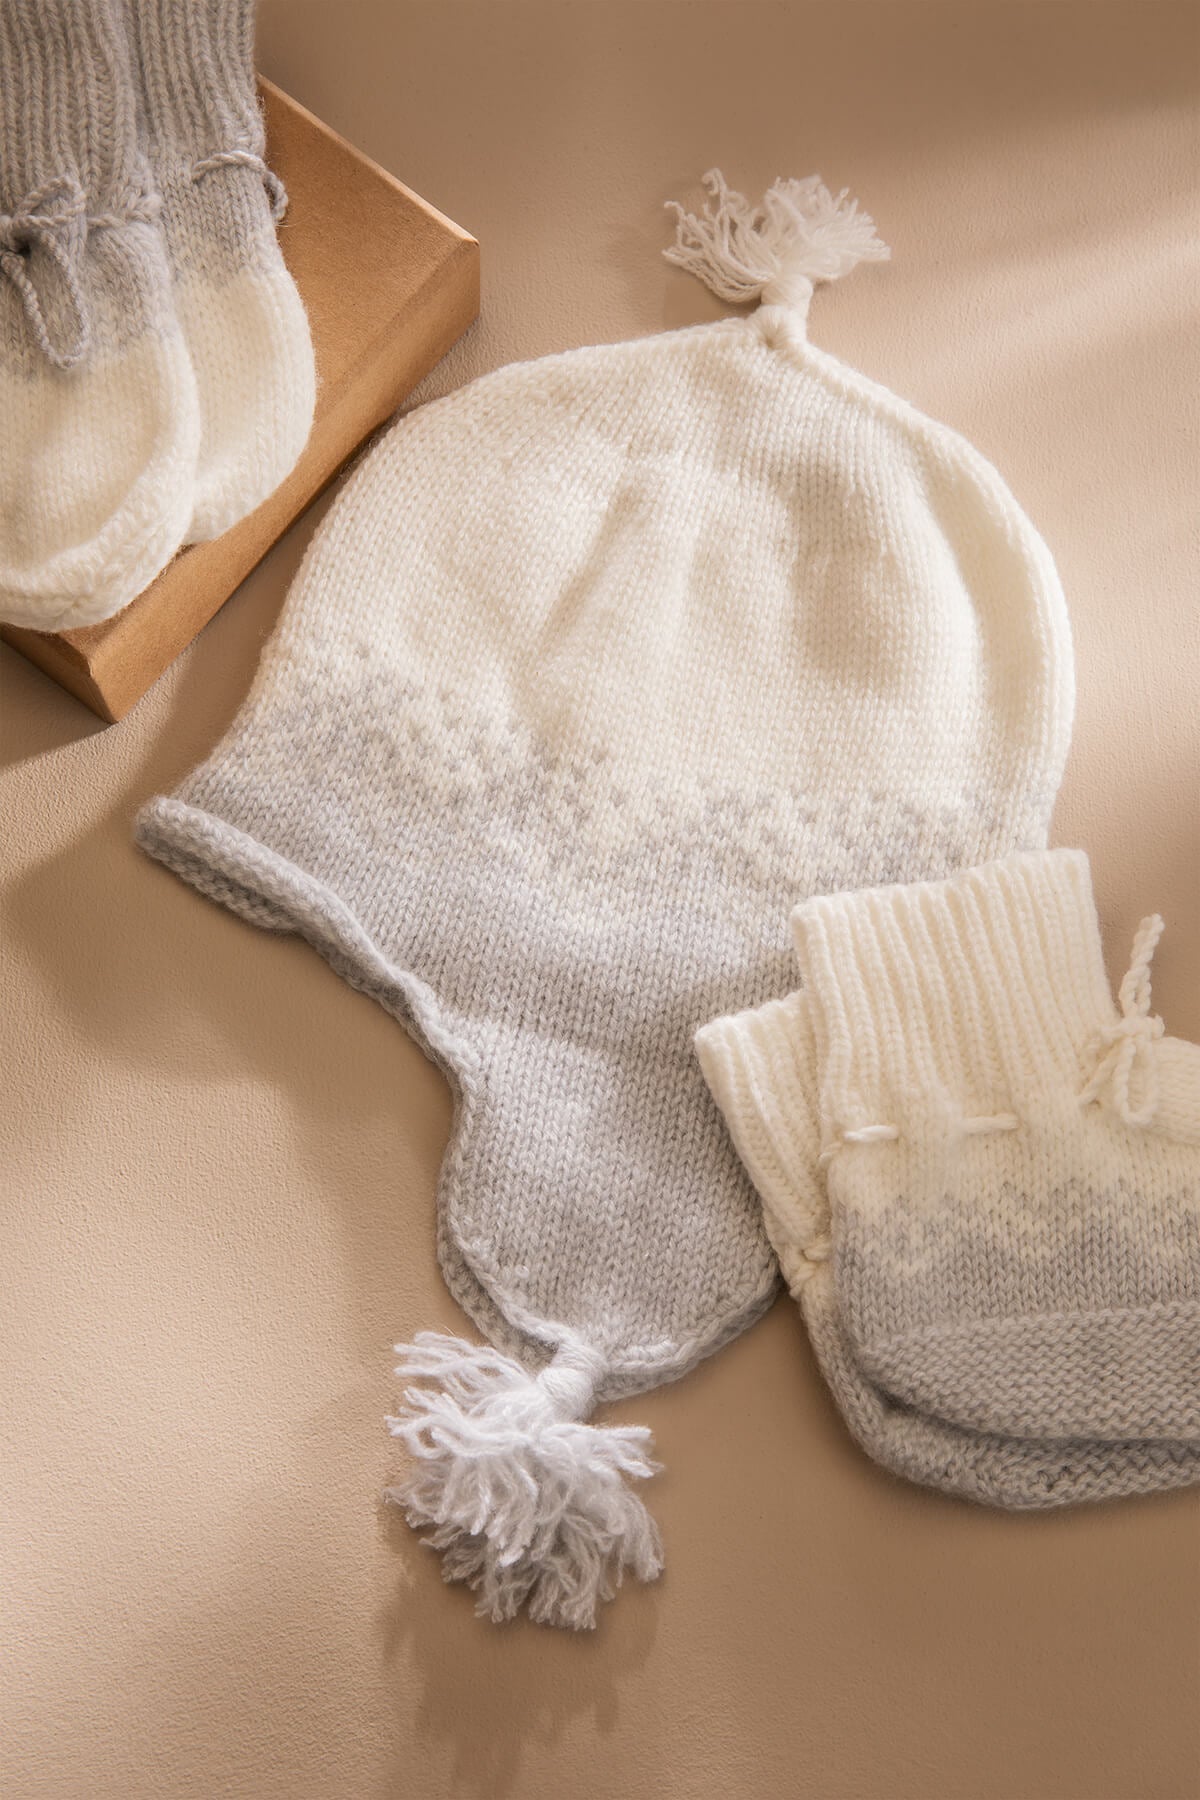 Johnstons of Elgin Gift Set includes our Cashmere Ombre Baby Hat, Mittens & Booties in Pumice on grey background AW21GIFTSET22A